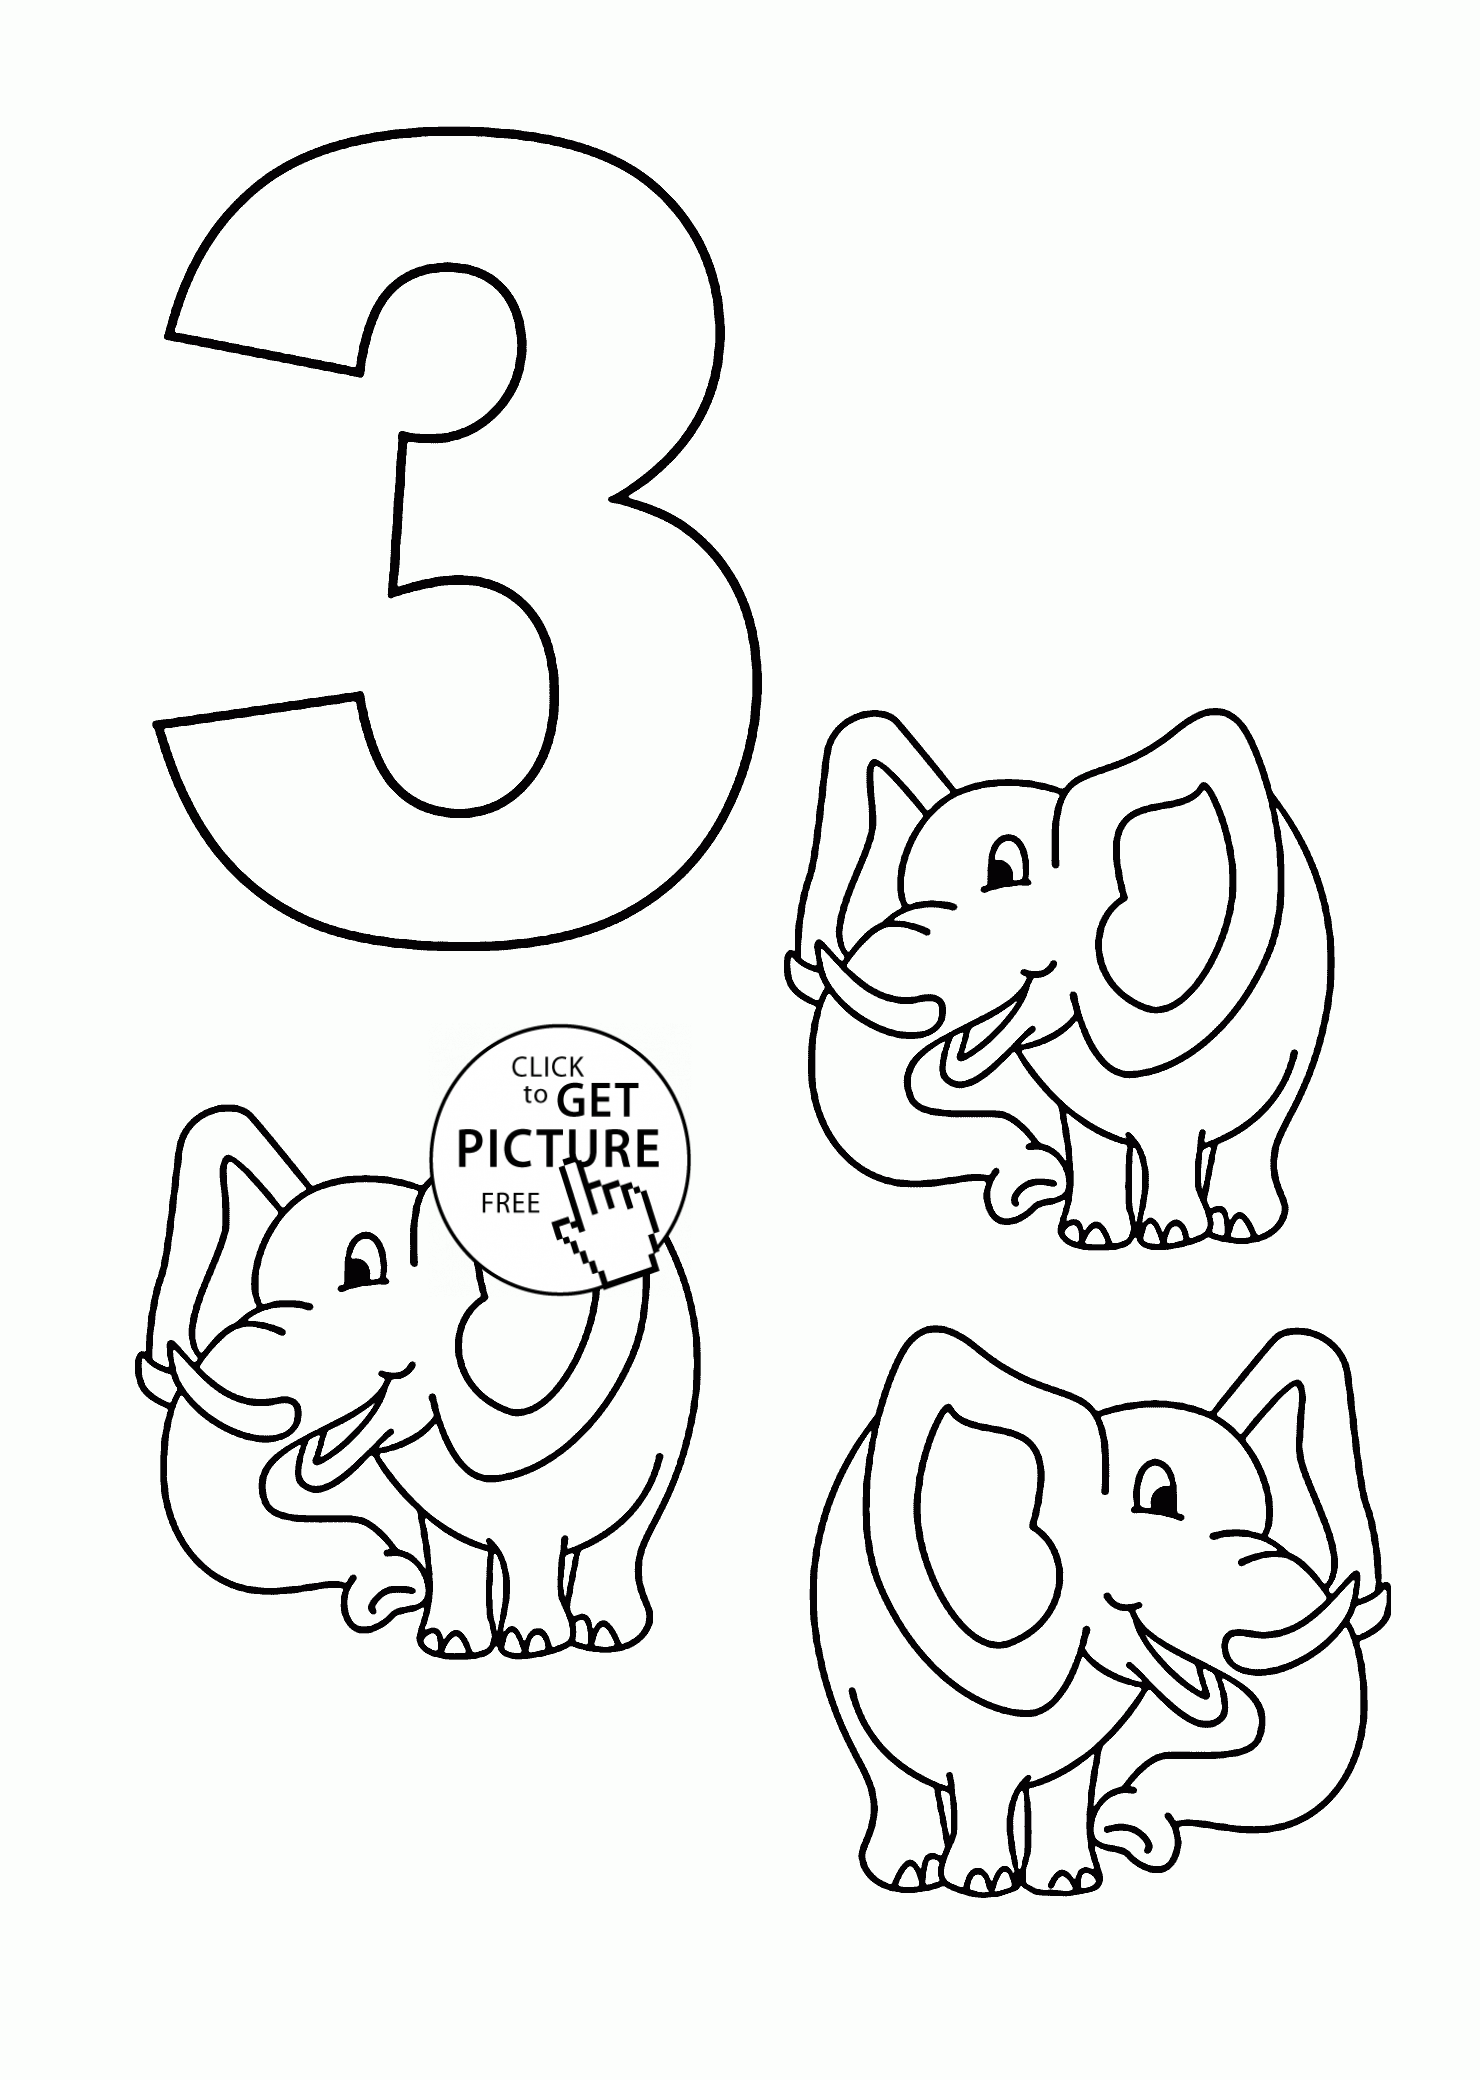 Number 3 coloring pages for kids, counting sheets printables free ...